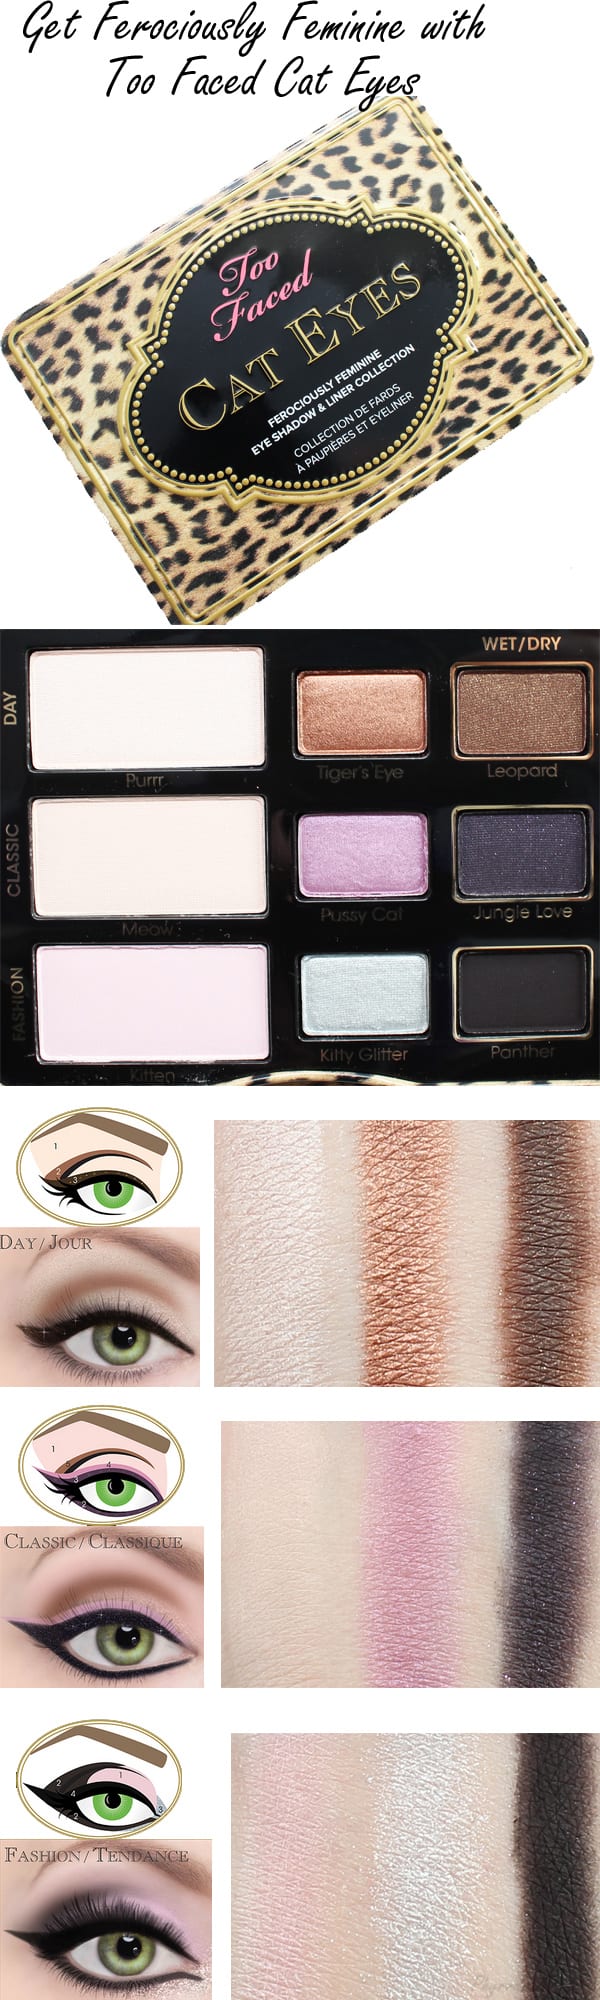 Too Faced Cat Eyes Palette Review Video Swatches